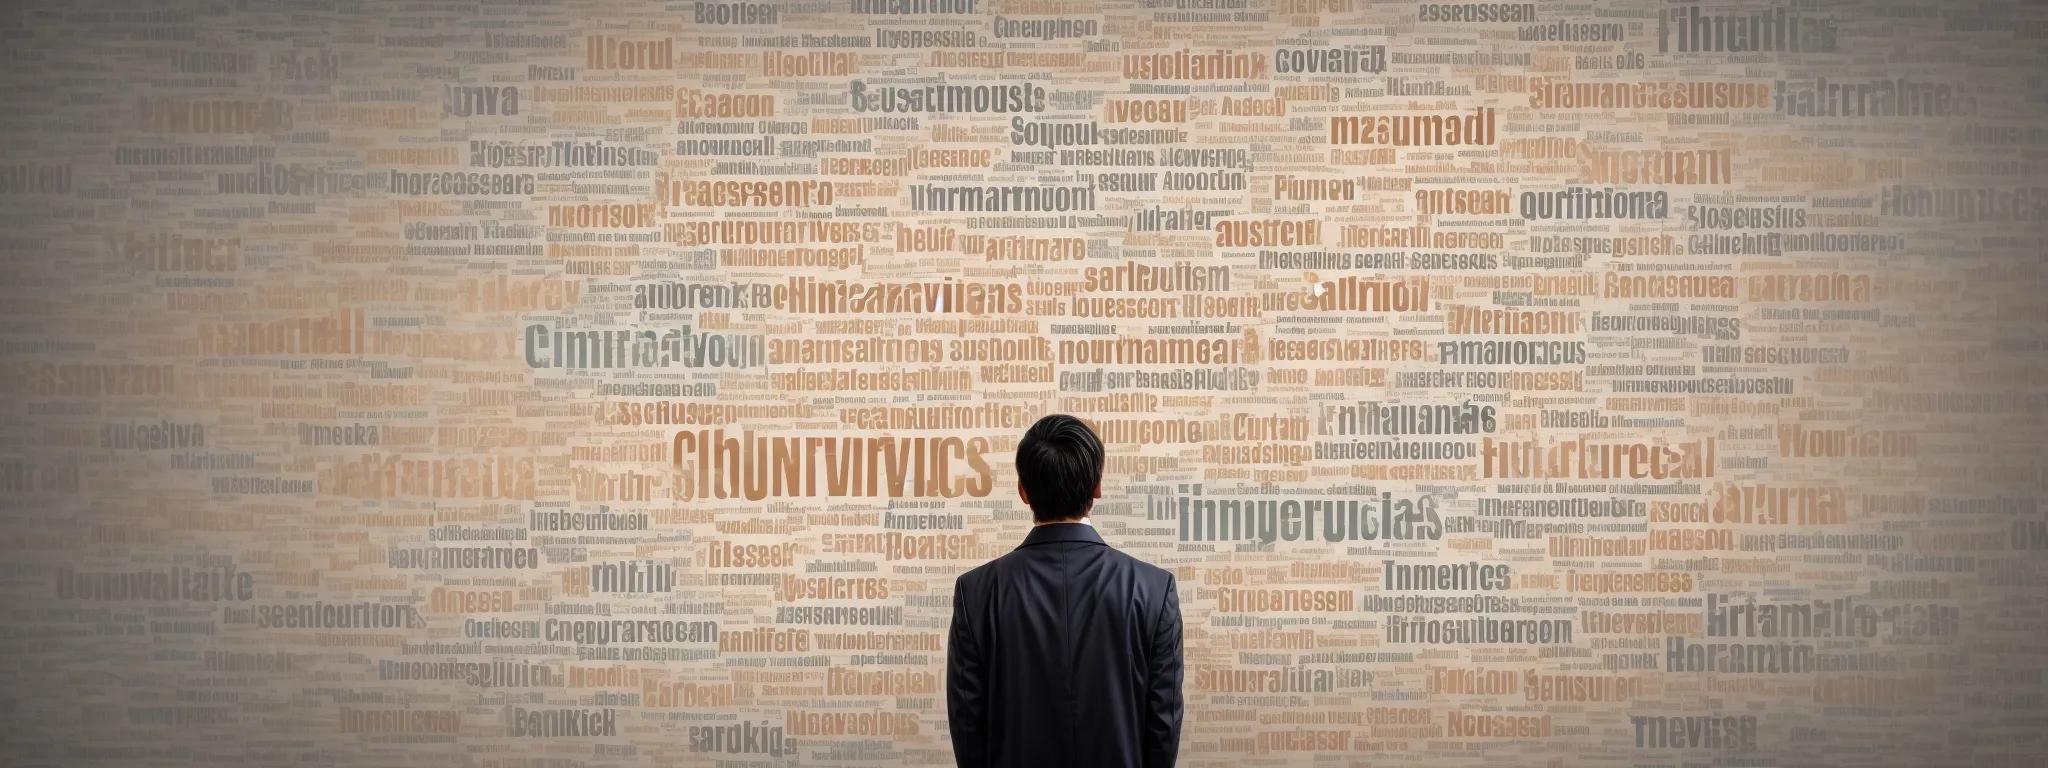 a person examines a large, interactive word cloud with diverse questions and search terms floating around a central topic.